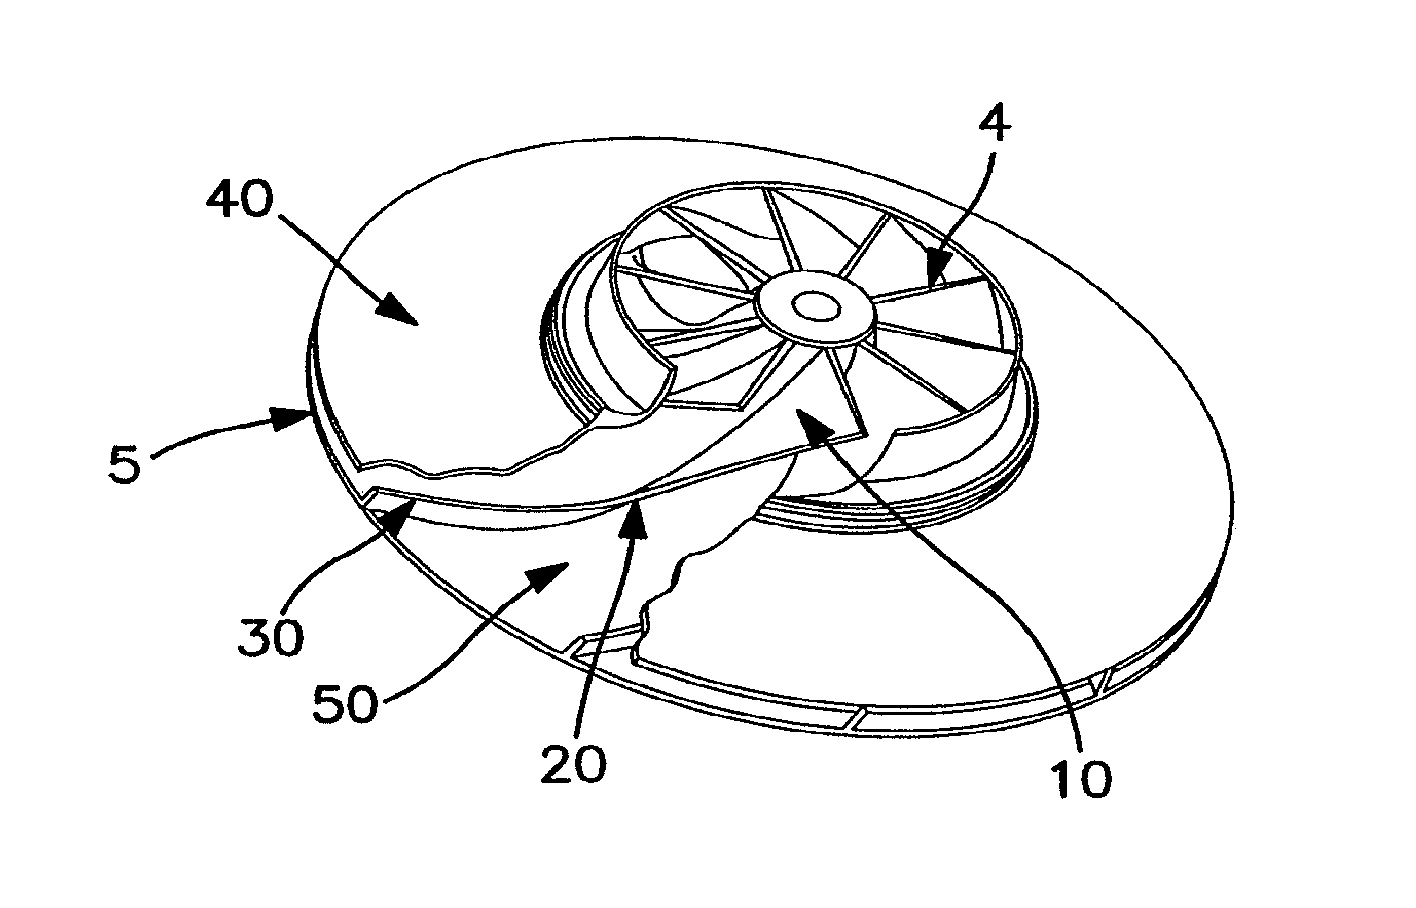 Compressor with large diameter shrouded three dimensional impeller